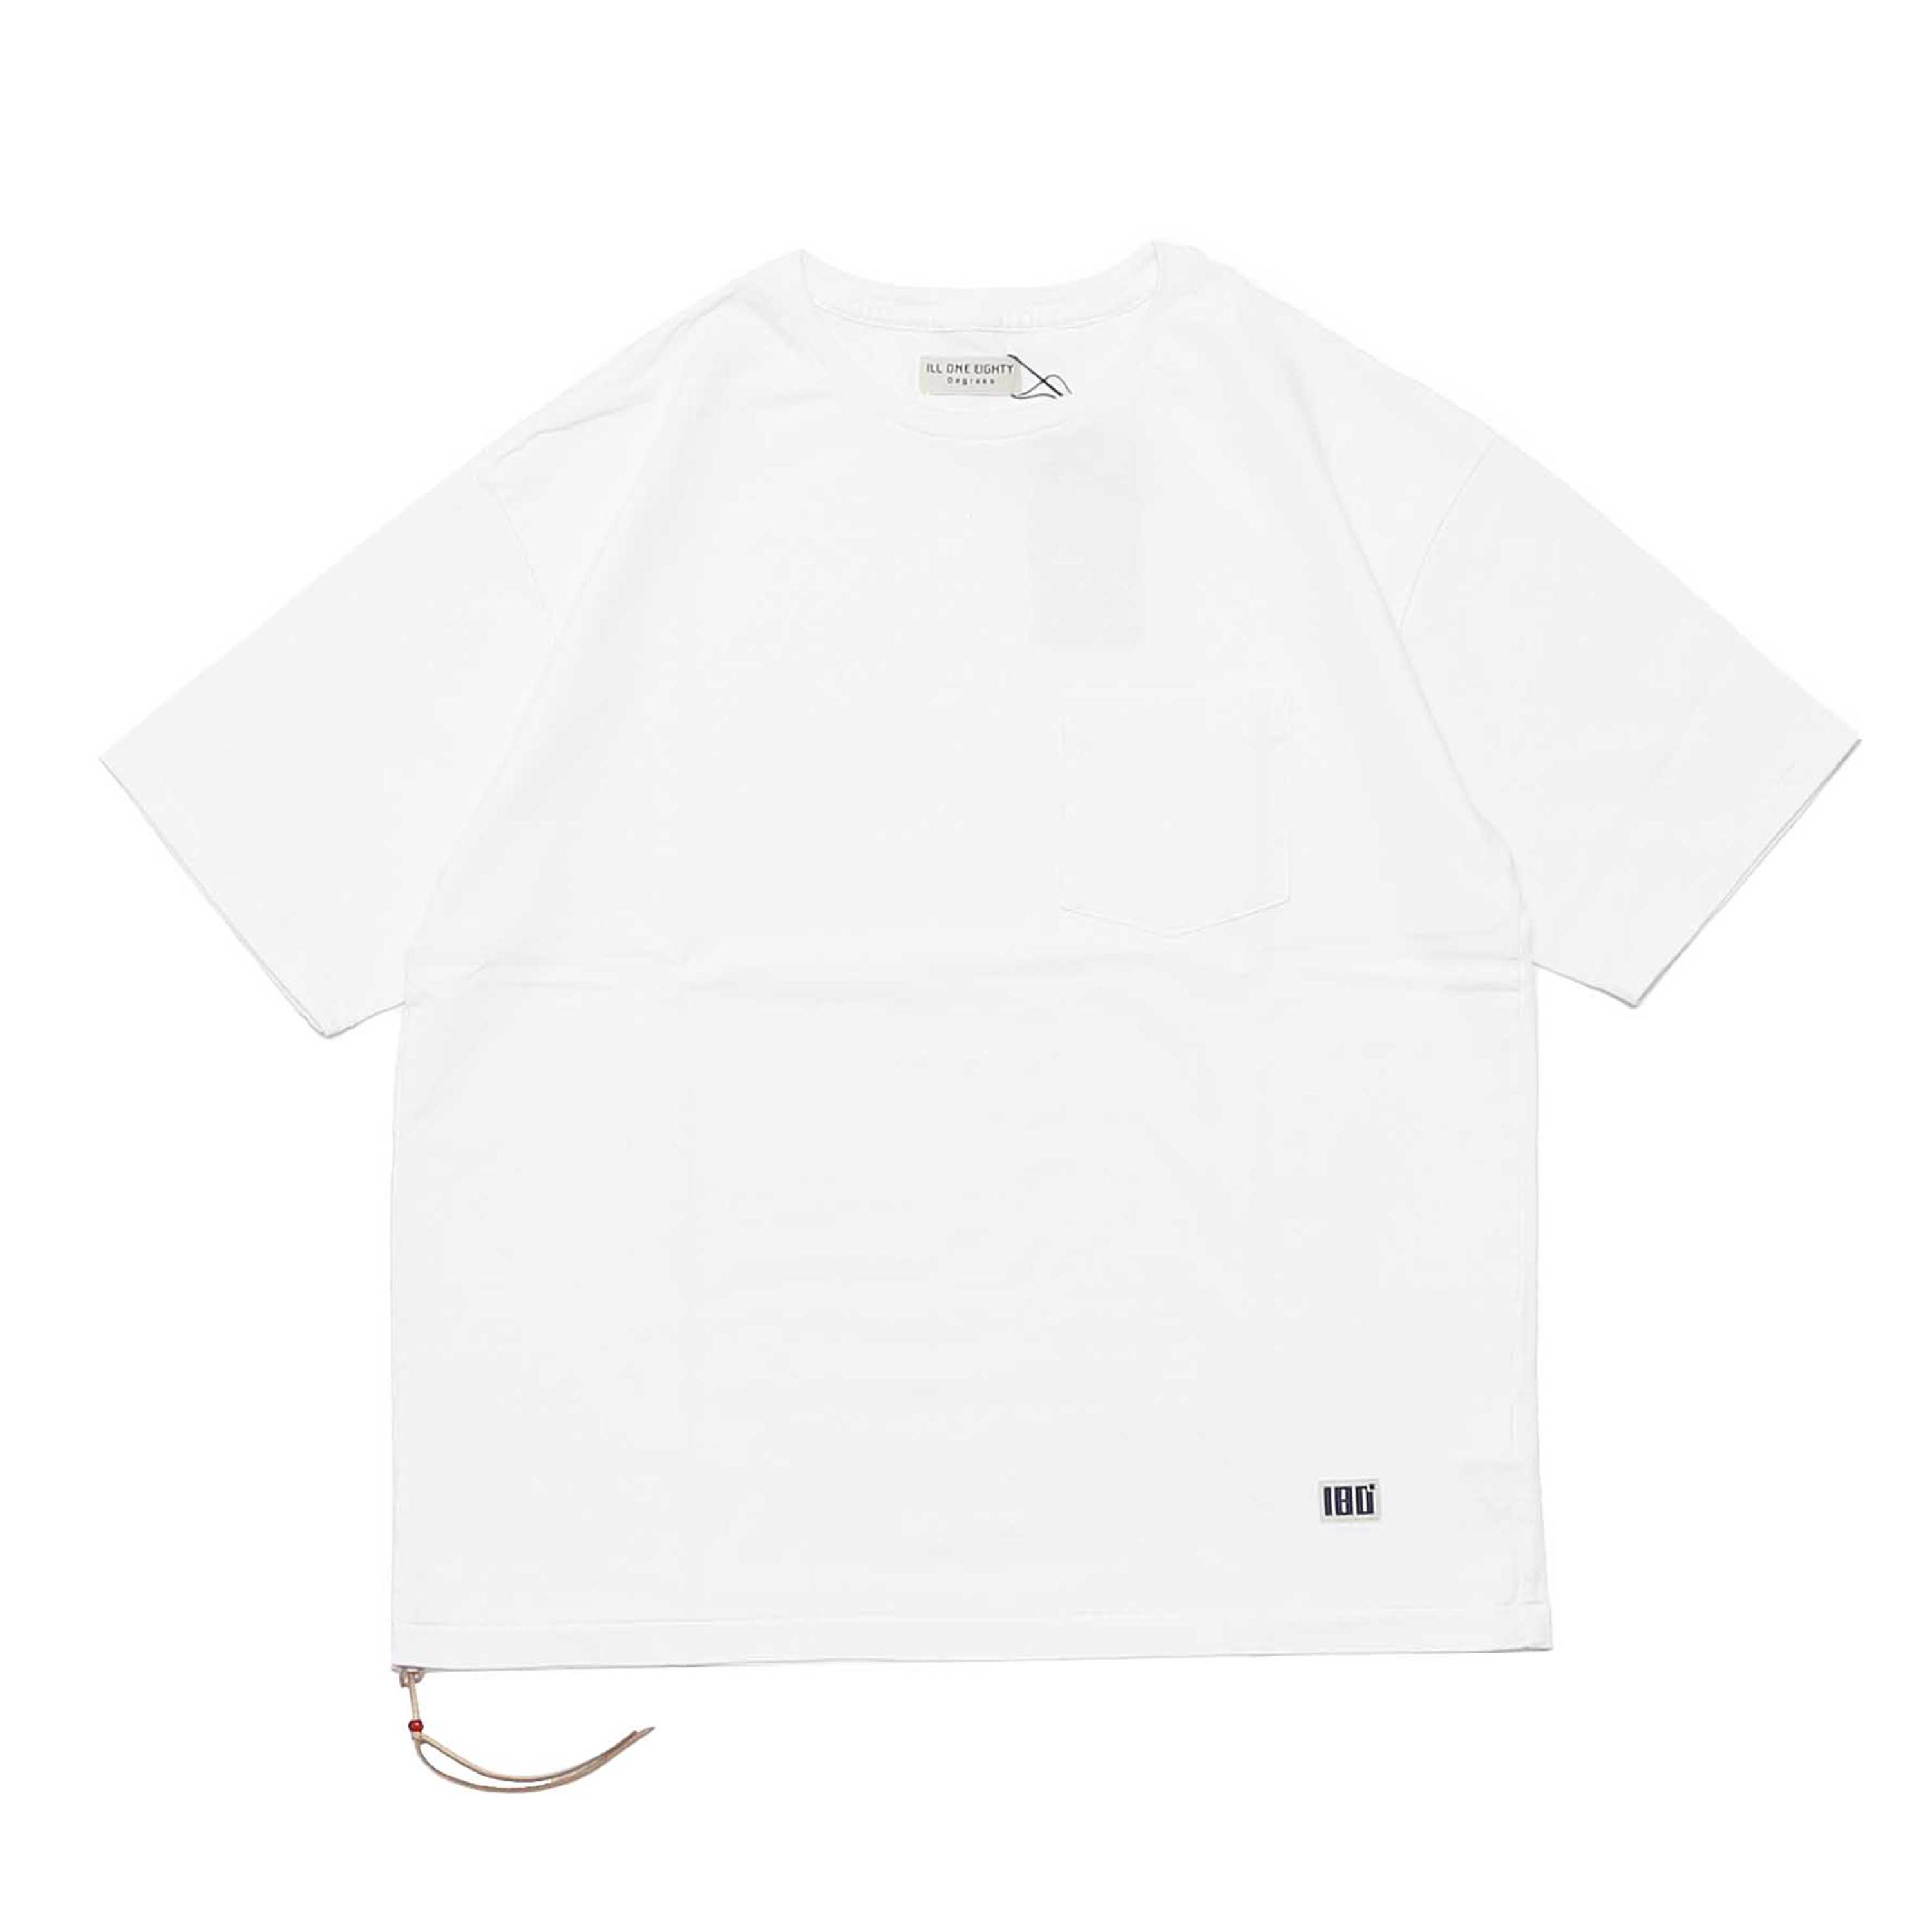 SOLID POCKET S/S TEE - WHITE